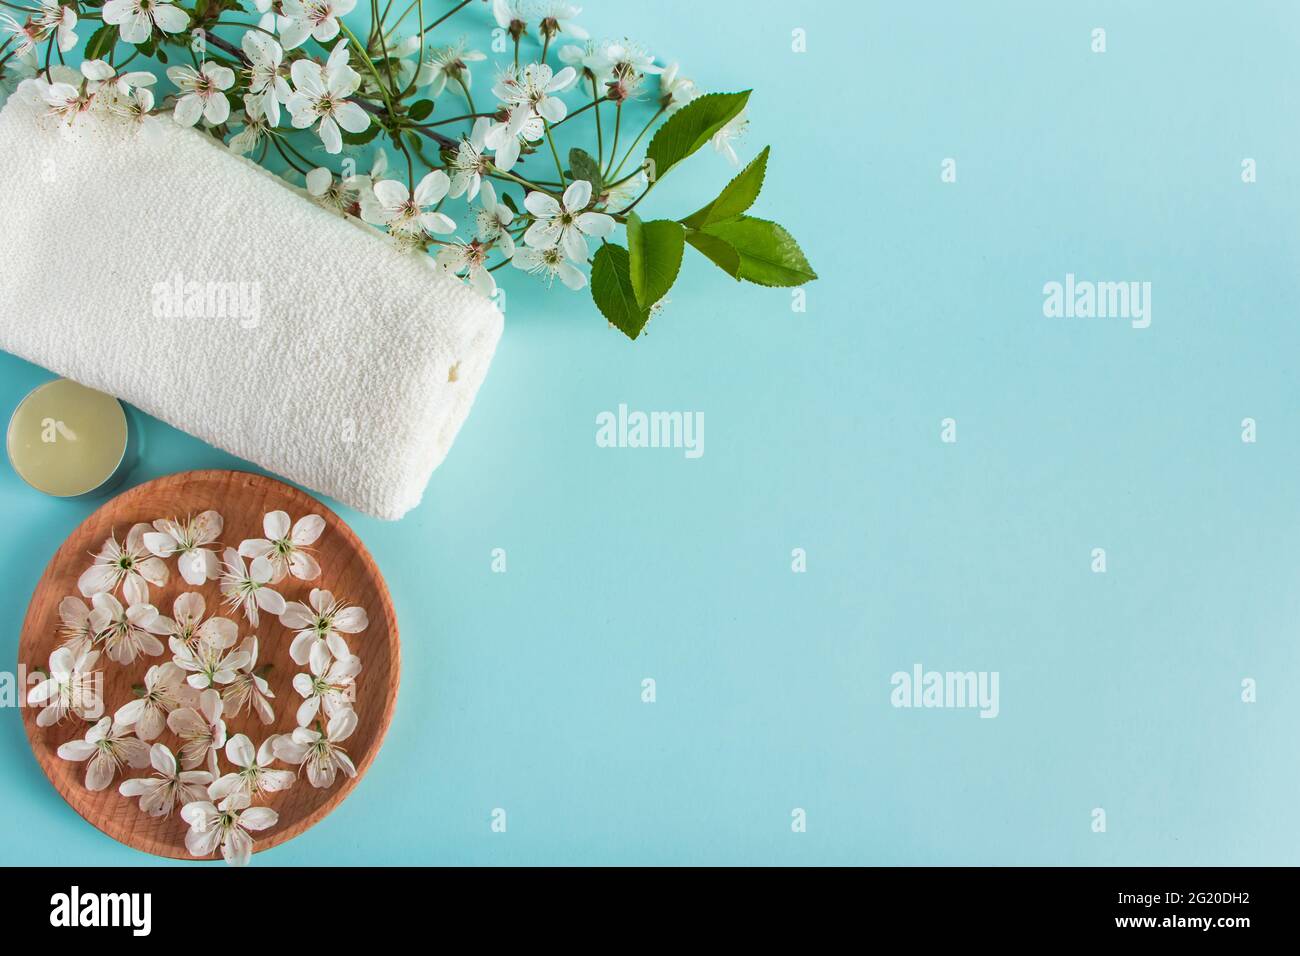 Natural organic beauty products for spa and aromatherapy. Aromatic essential oil, candles and a towel on a blue background. Relaxation concept, place Stock Photo